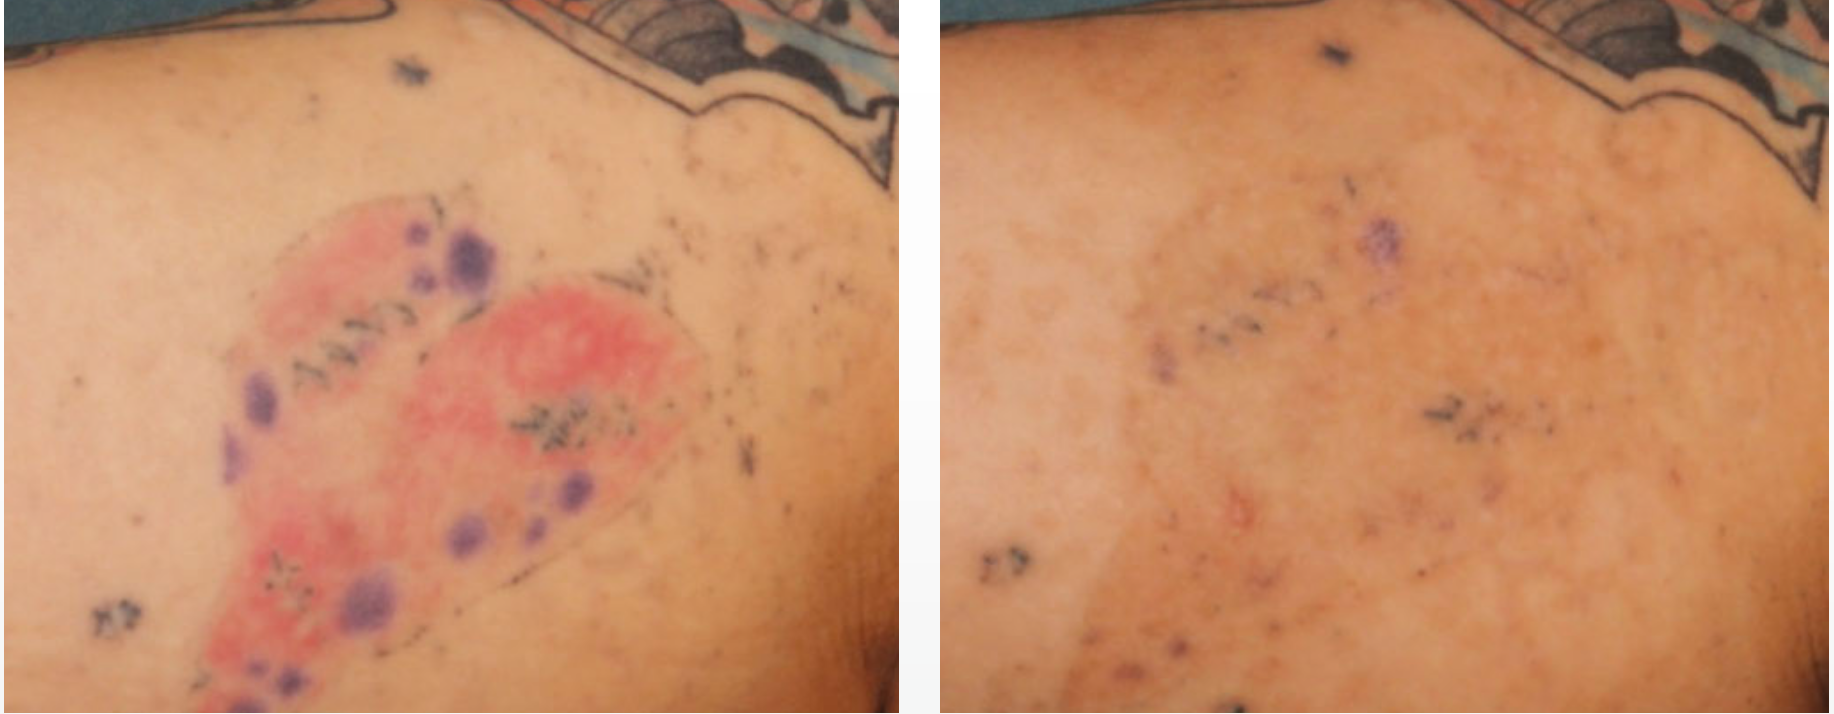 Laser Tattoo Removal near me  The Norwich Face  Body Clinic